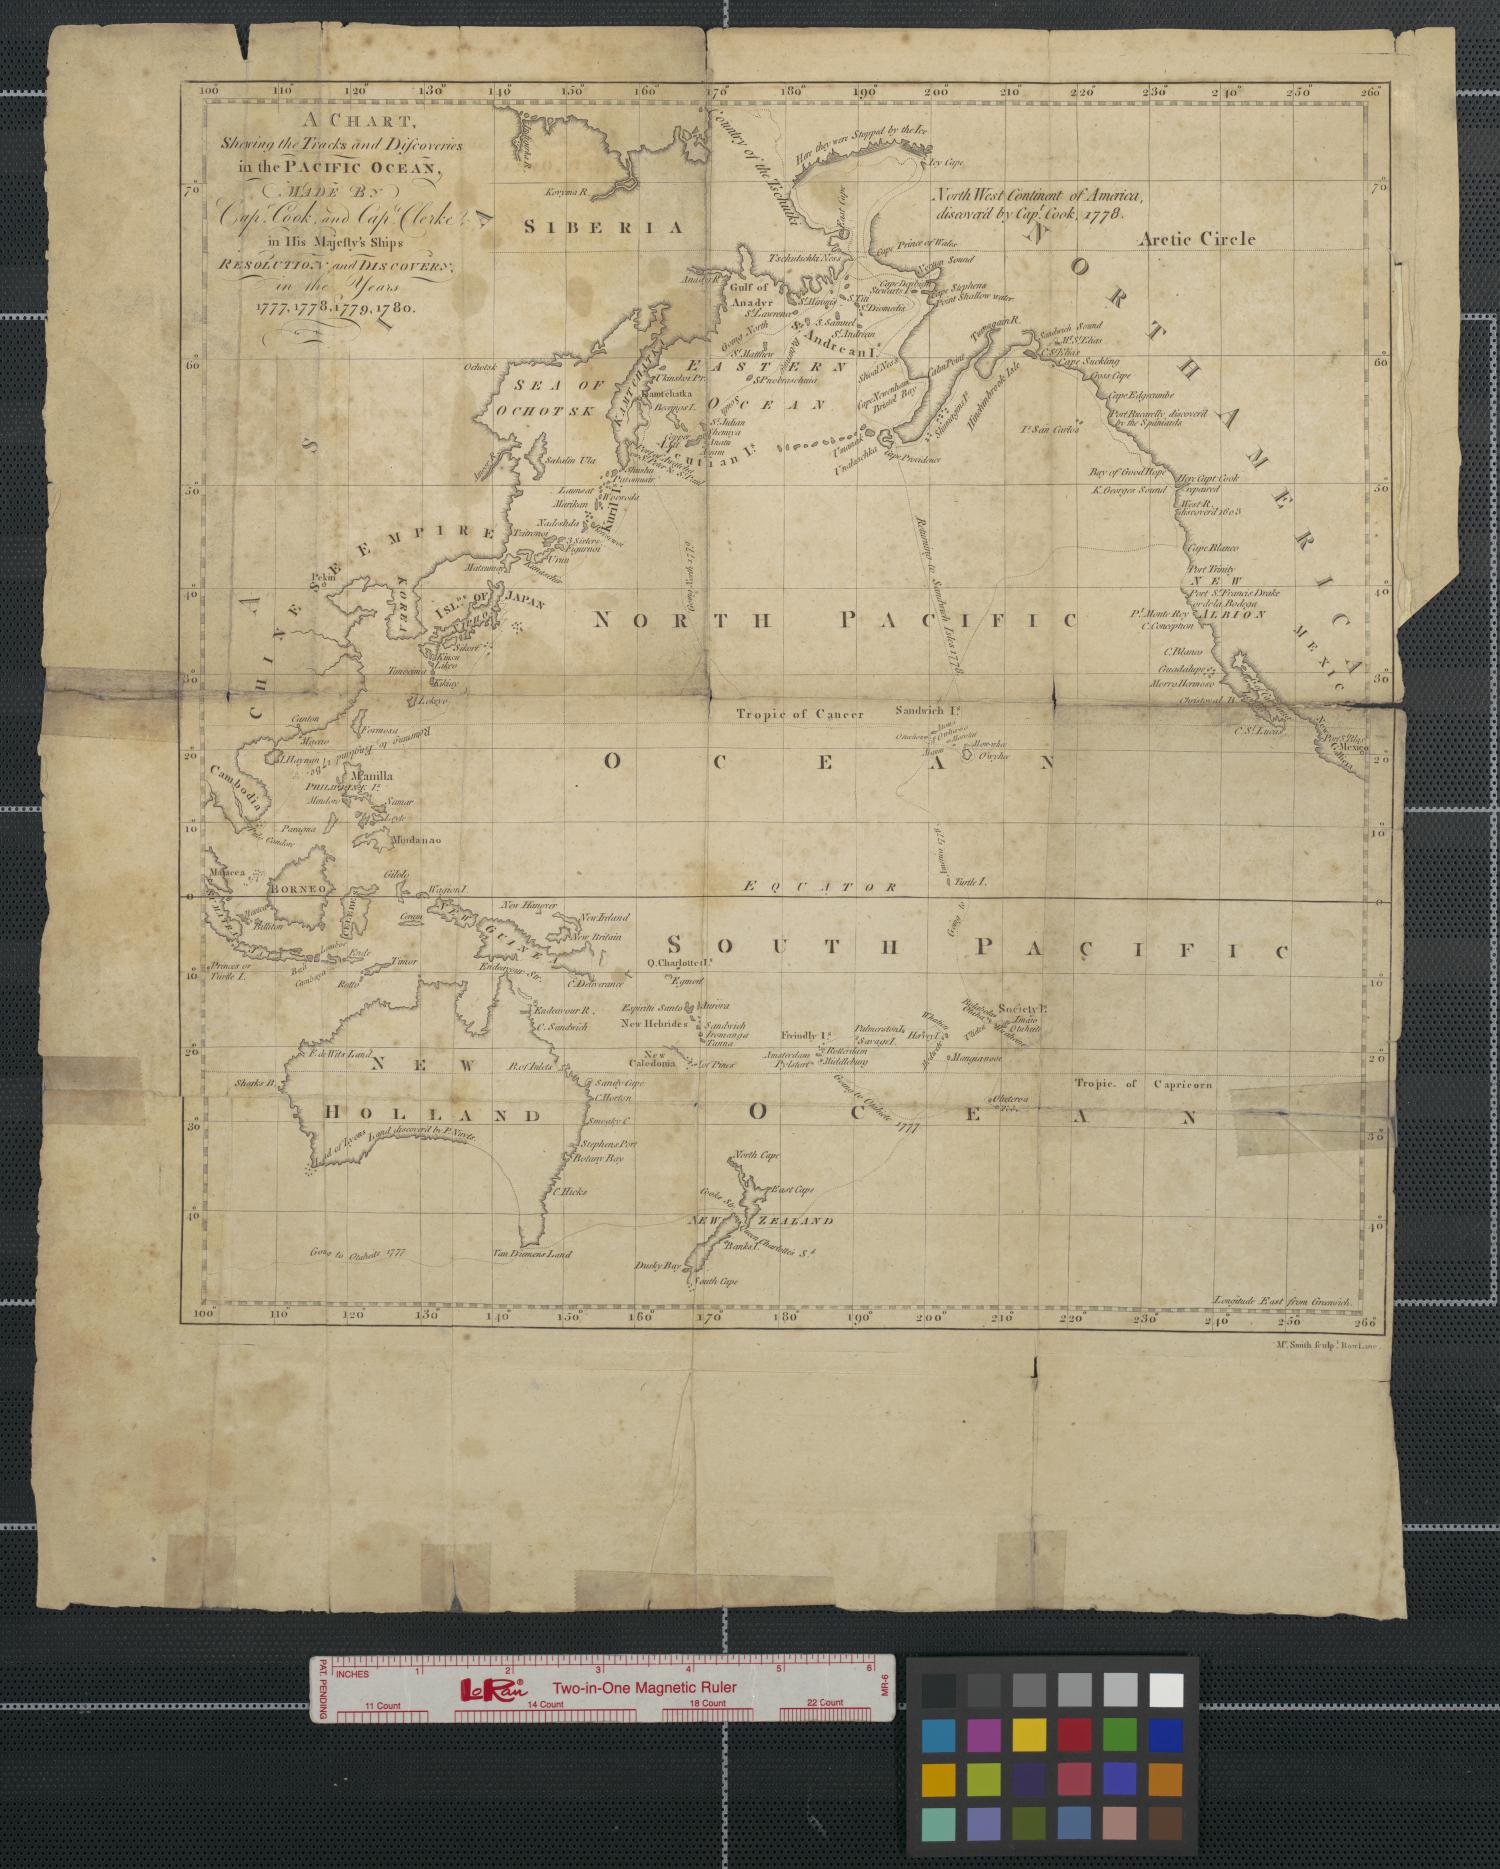 A chart shewing [sic] the tracks and discoveries in the Pacific ocean made by Capt. Cook and Capt. Clerke in His Majesty's ships Resolution and Discovery, in the years 1777, 1778, 1779, 1780.
                                                
                                                    [Sequence #]: 1 of 2
                                                